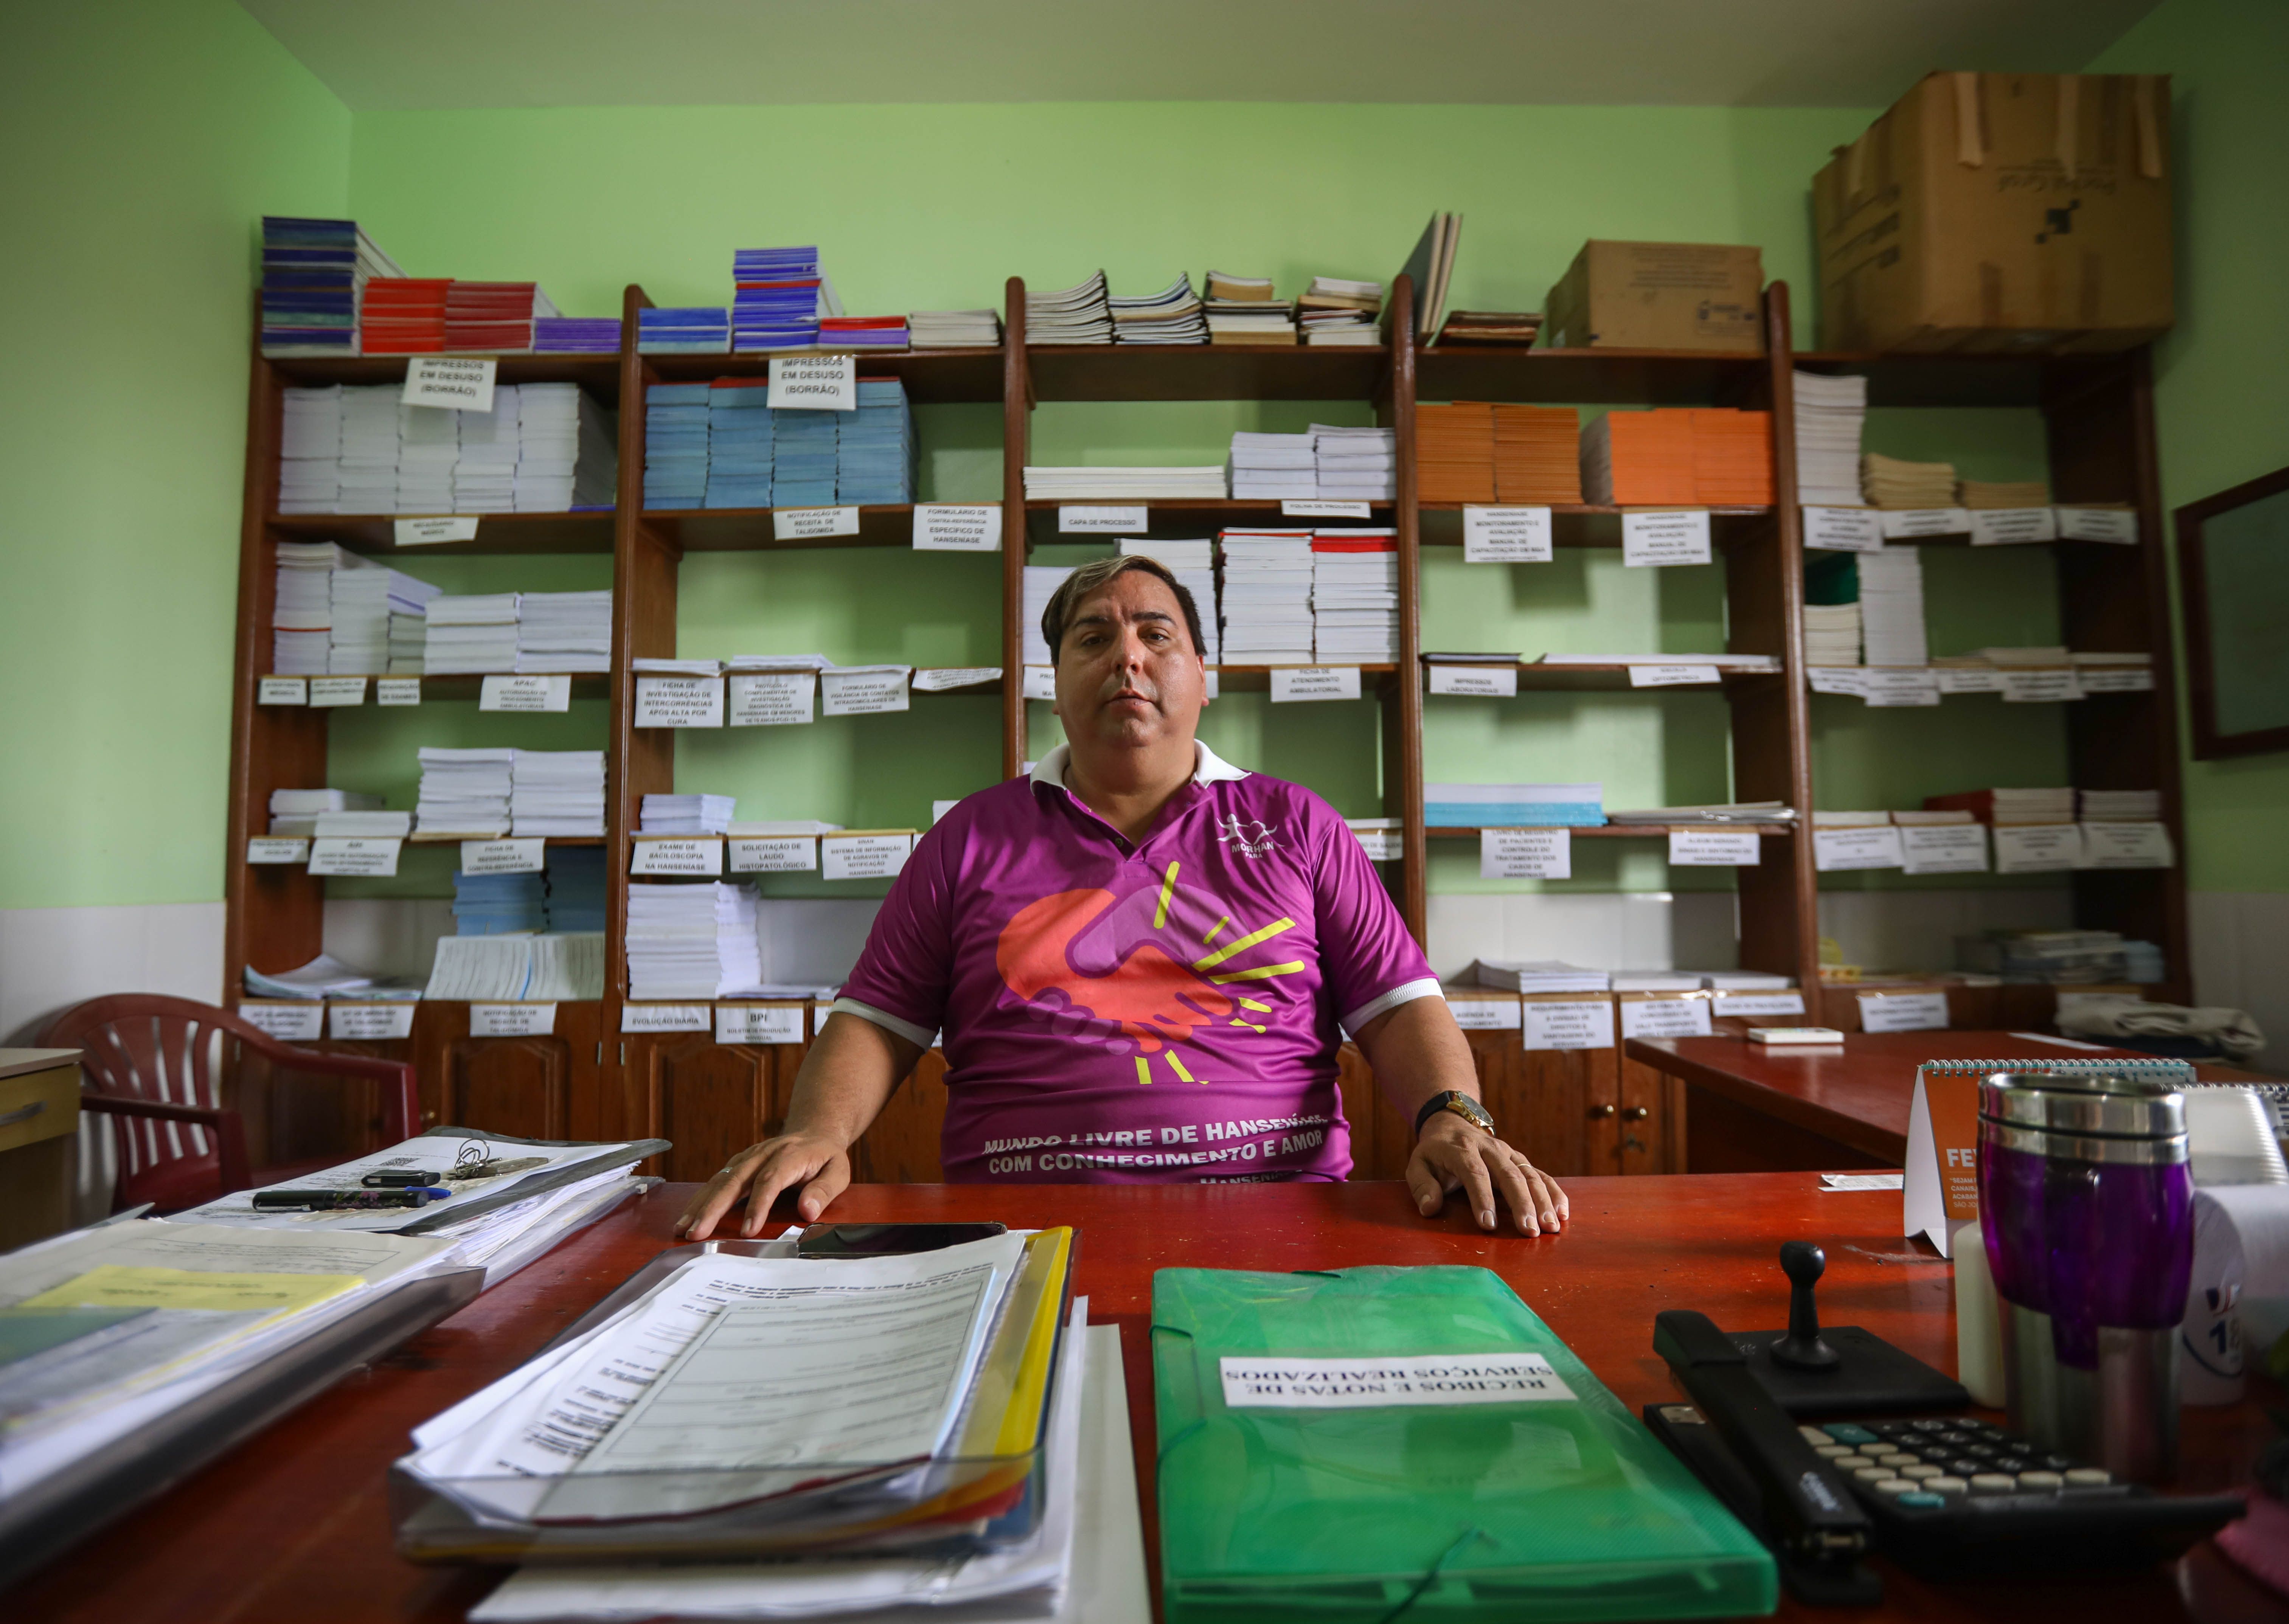 Edmilison Picanco, president of MOHAN in Pará, sits at his desk at the Center of Dermatology in Marituba. As the son of two leprosy patients, Picanco is leading the campaign demanding federal reparations for the children of these patients. Image by Anton L. Delgado. Brazil, 2020.